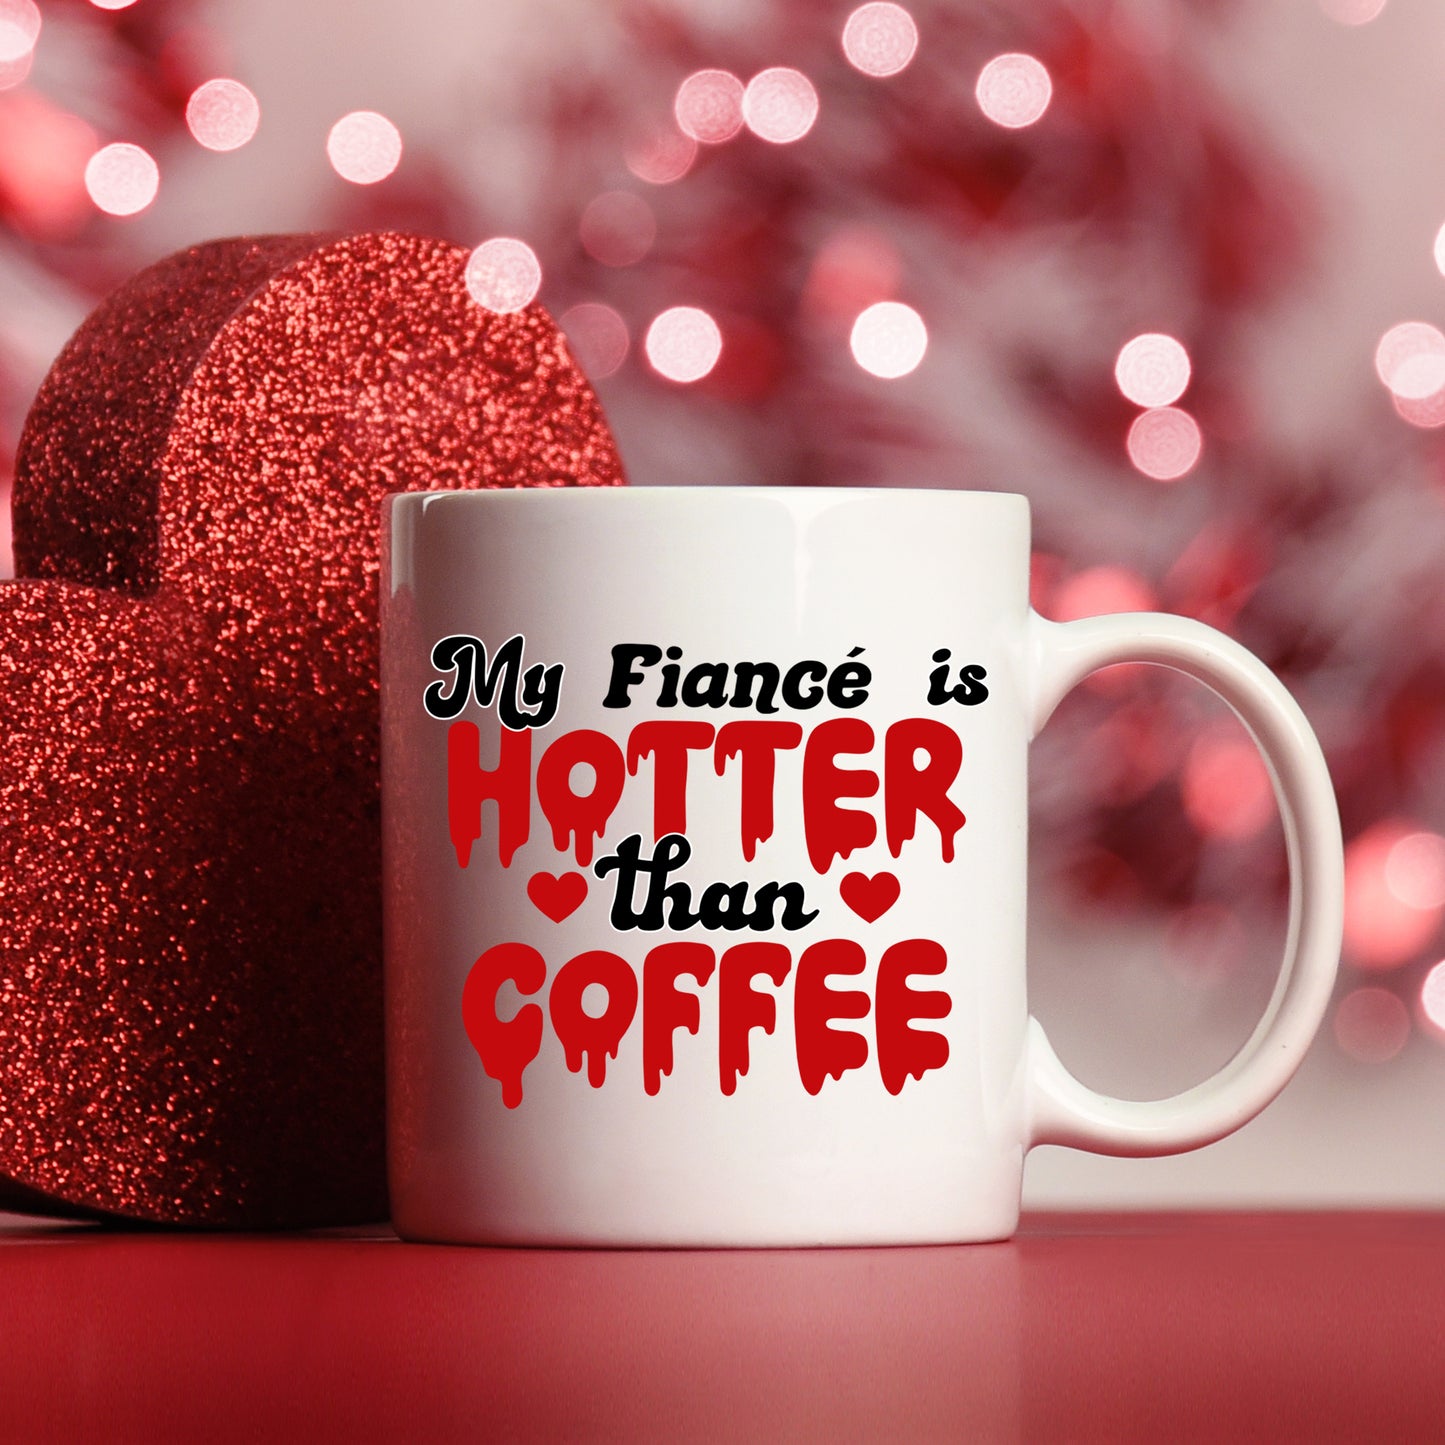 My Fiancé/Fiancée Is Hotter Than Coffee Mug and/or Coaster Gift  - Always Looking Good - Fiancé Mug On Its Own  